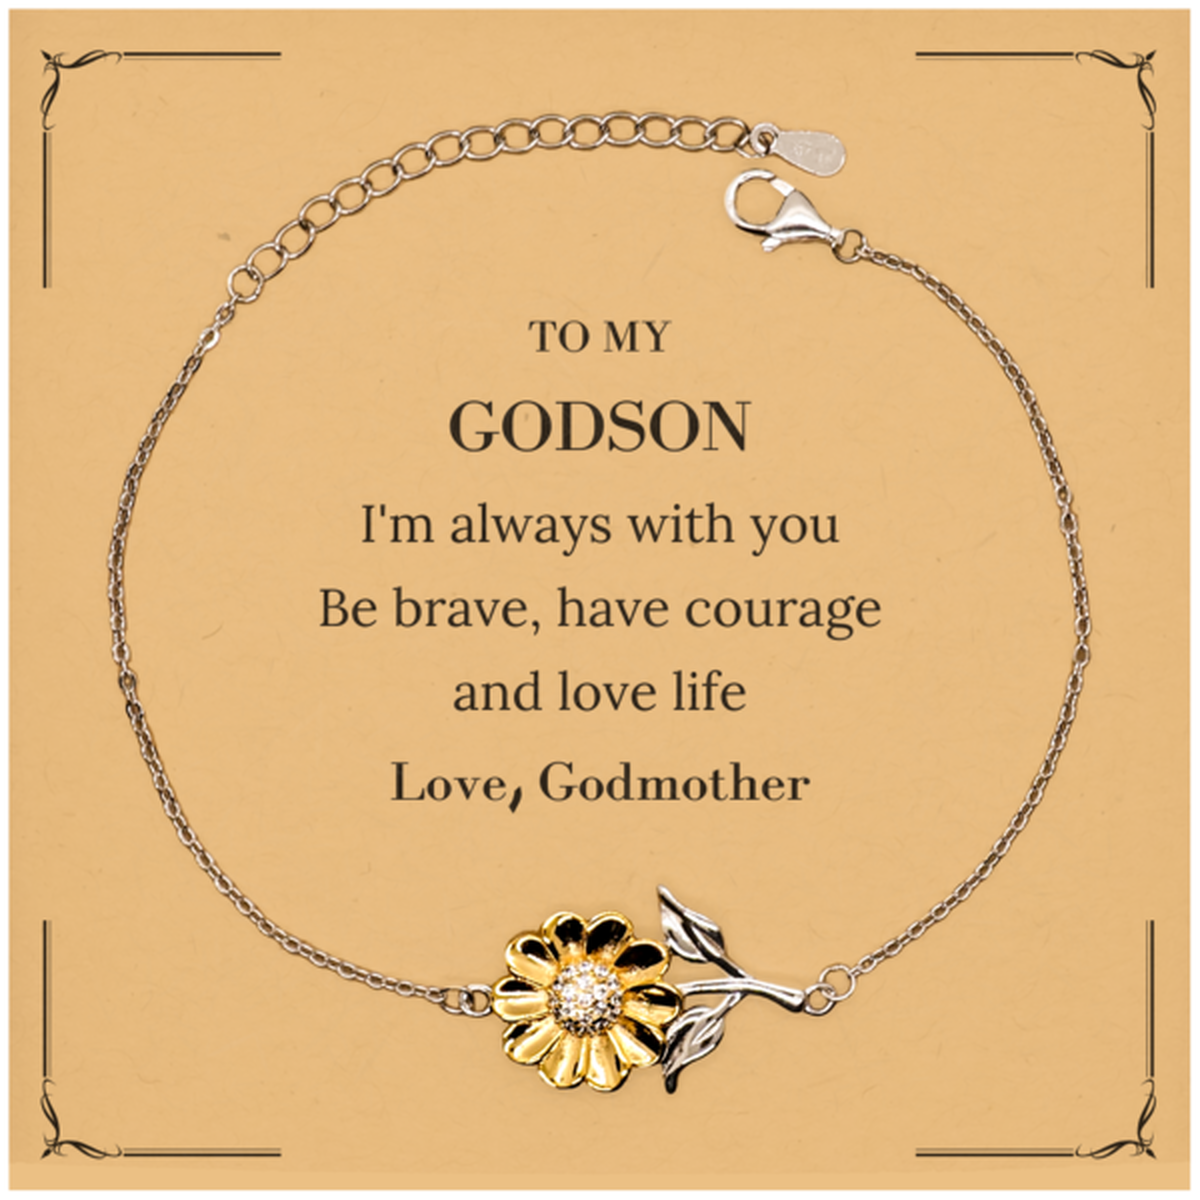 To My Godson Gifts from Godmother, Unique Sunflower Bracelet Inspirational Christmas Birthday Graduation Gifts for Godson I'm always with you. Be brave, have courage and love life. Love, Godmother